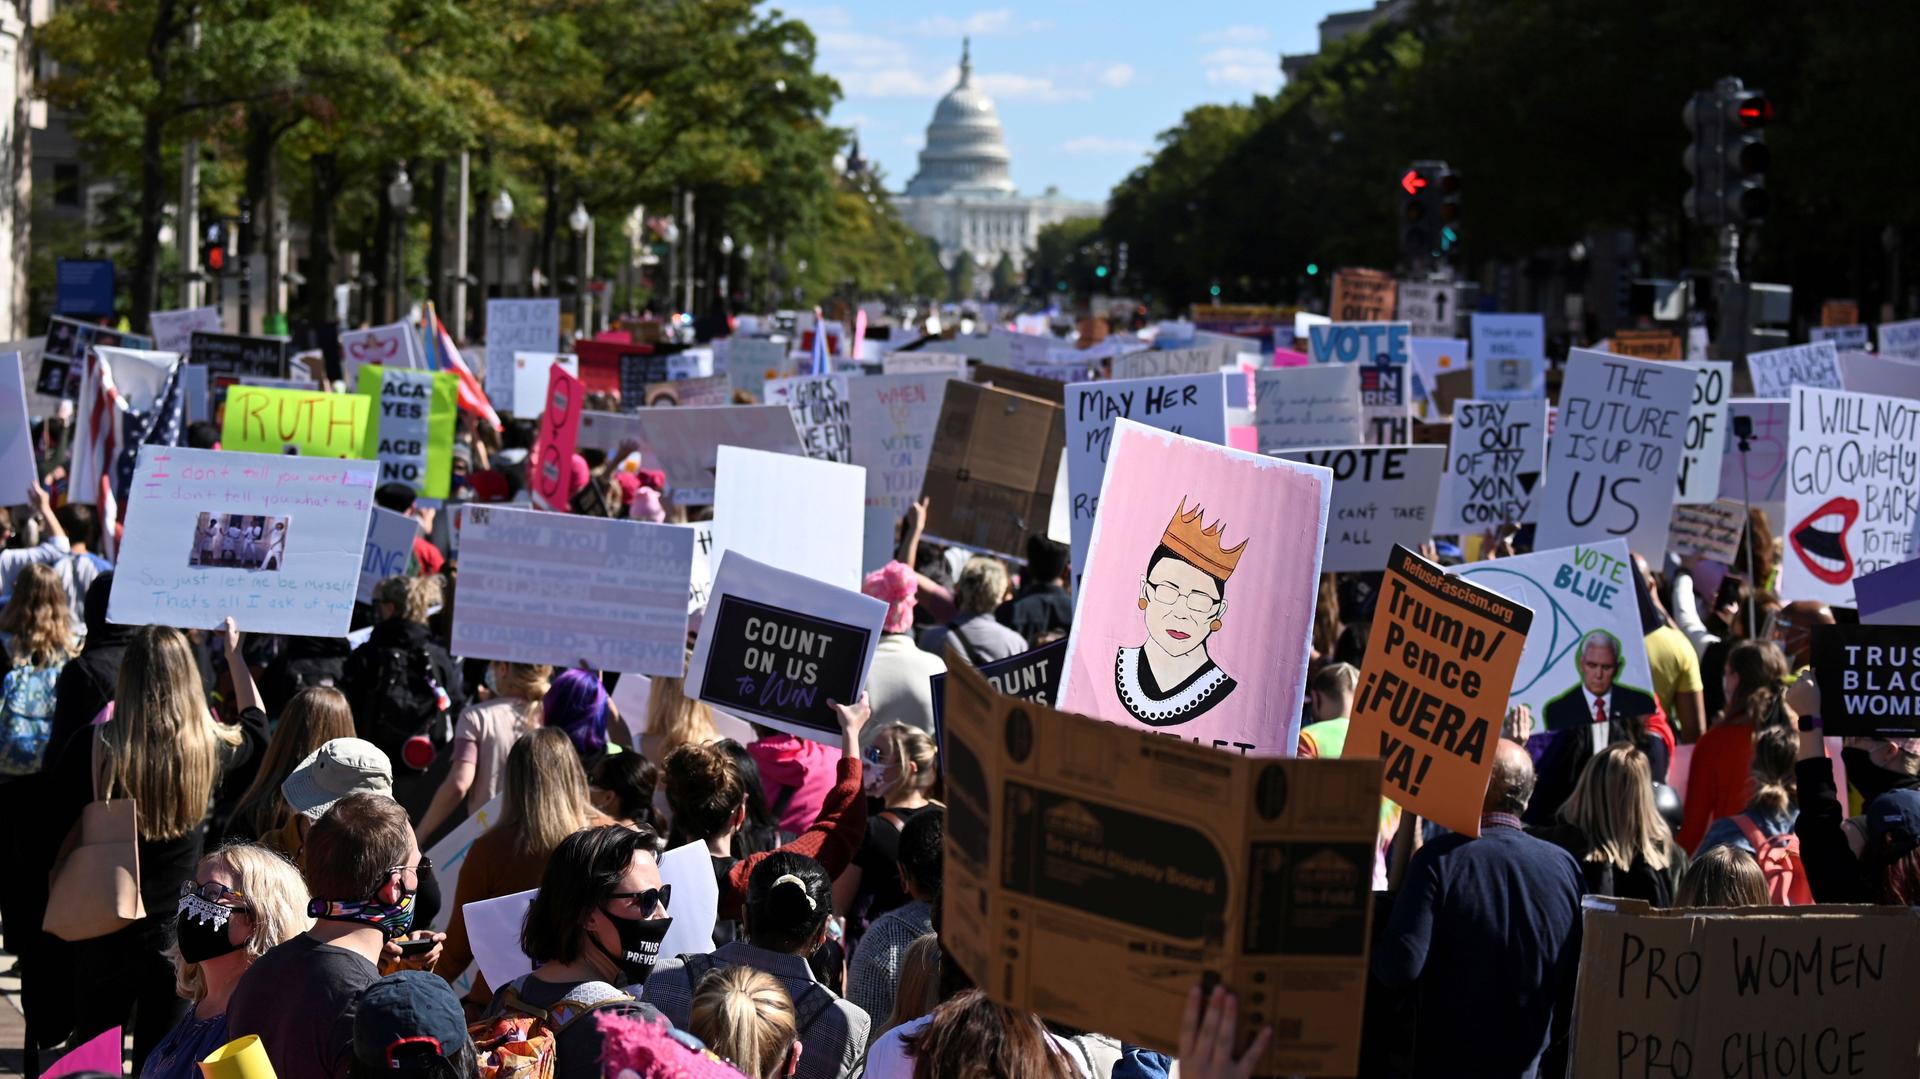 Women's March activists participate in a nationwide protest against US President Donald Trump's decision to fill the seat on the Supreme Court left by the passing of late Justice Ruth Bader Ginsburg before the 2020 election, in Washington, Oct. 17, 2020. 